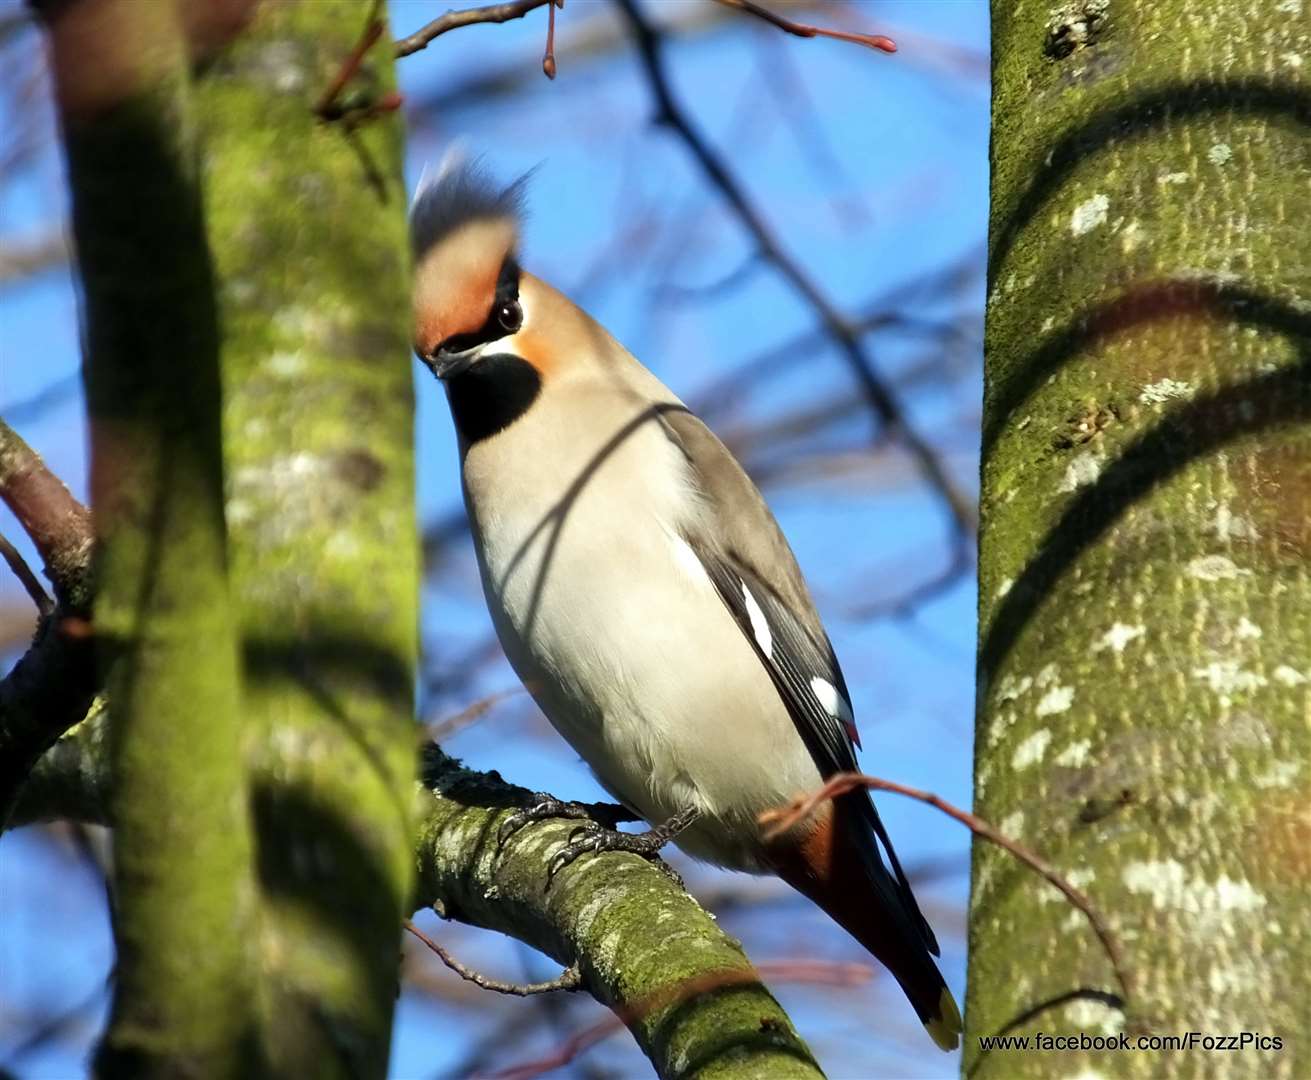 Paul Fouracre captured this image of a waxwing in Northfleet - one of a massive flock that drew bird watchers to the Coldharbour Road